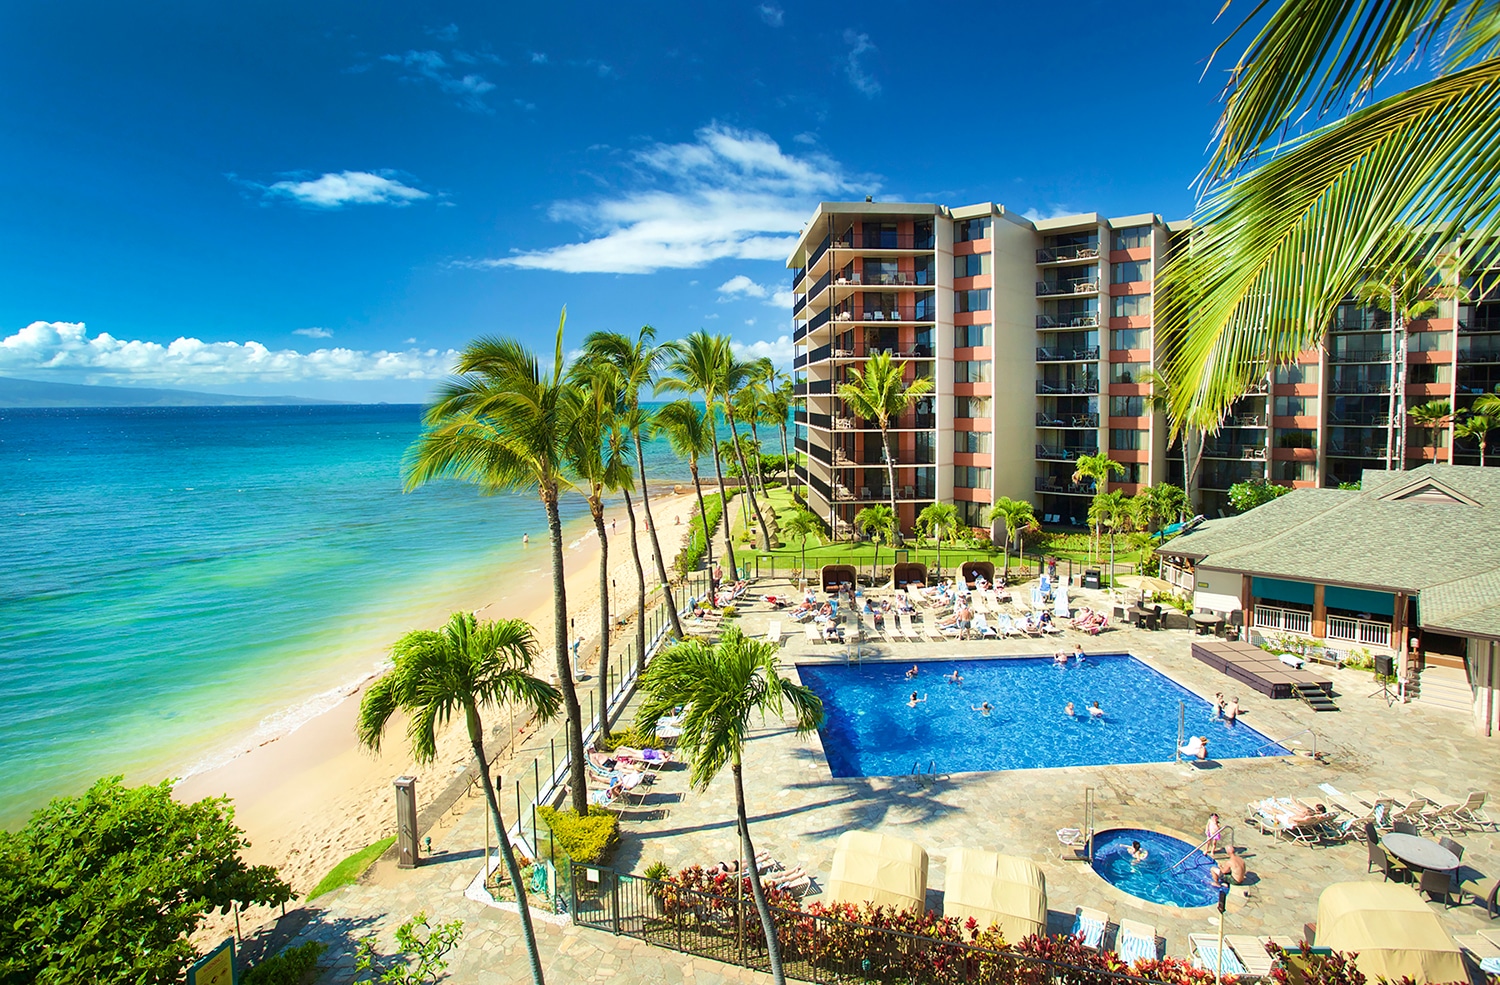 Cheap and Affordable Hotels in Maui: Aston Kaanapali Shores